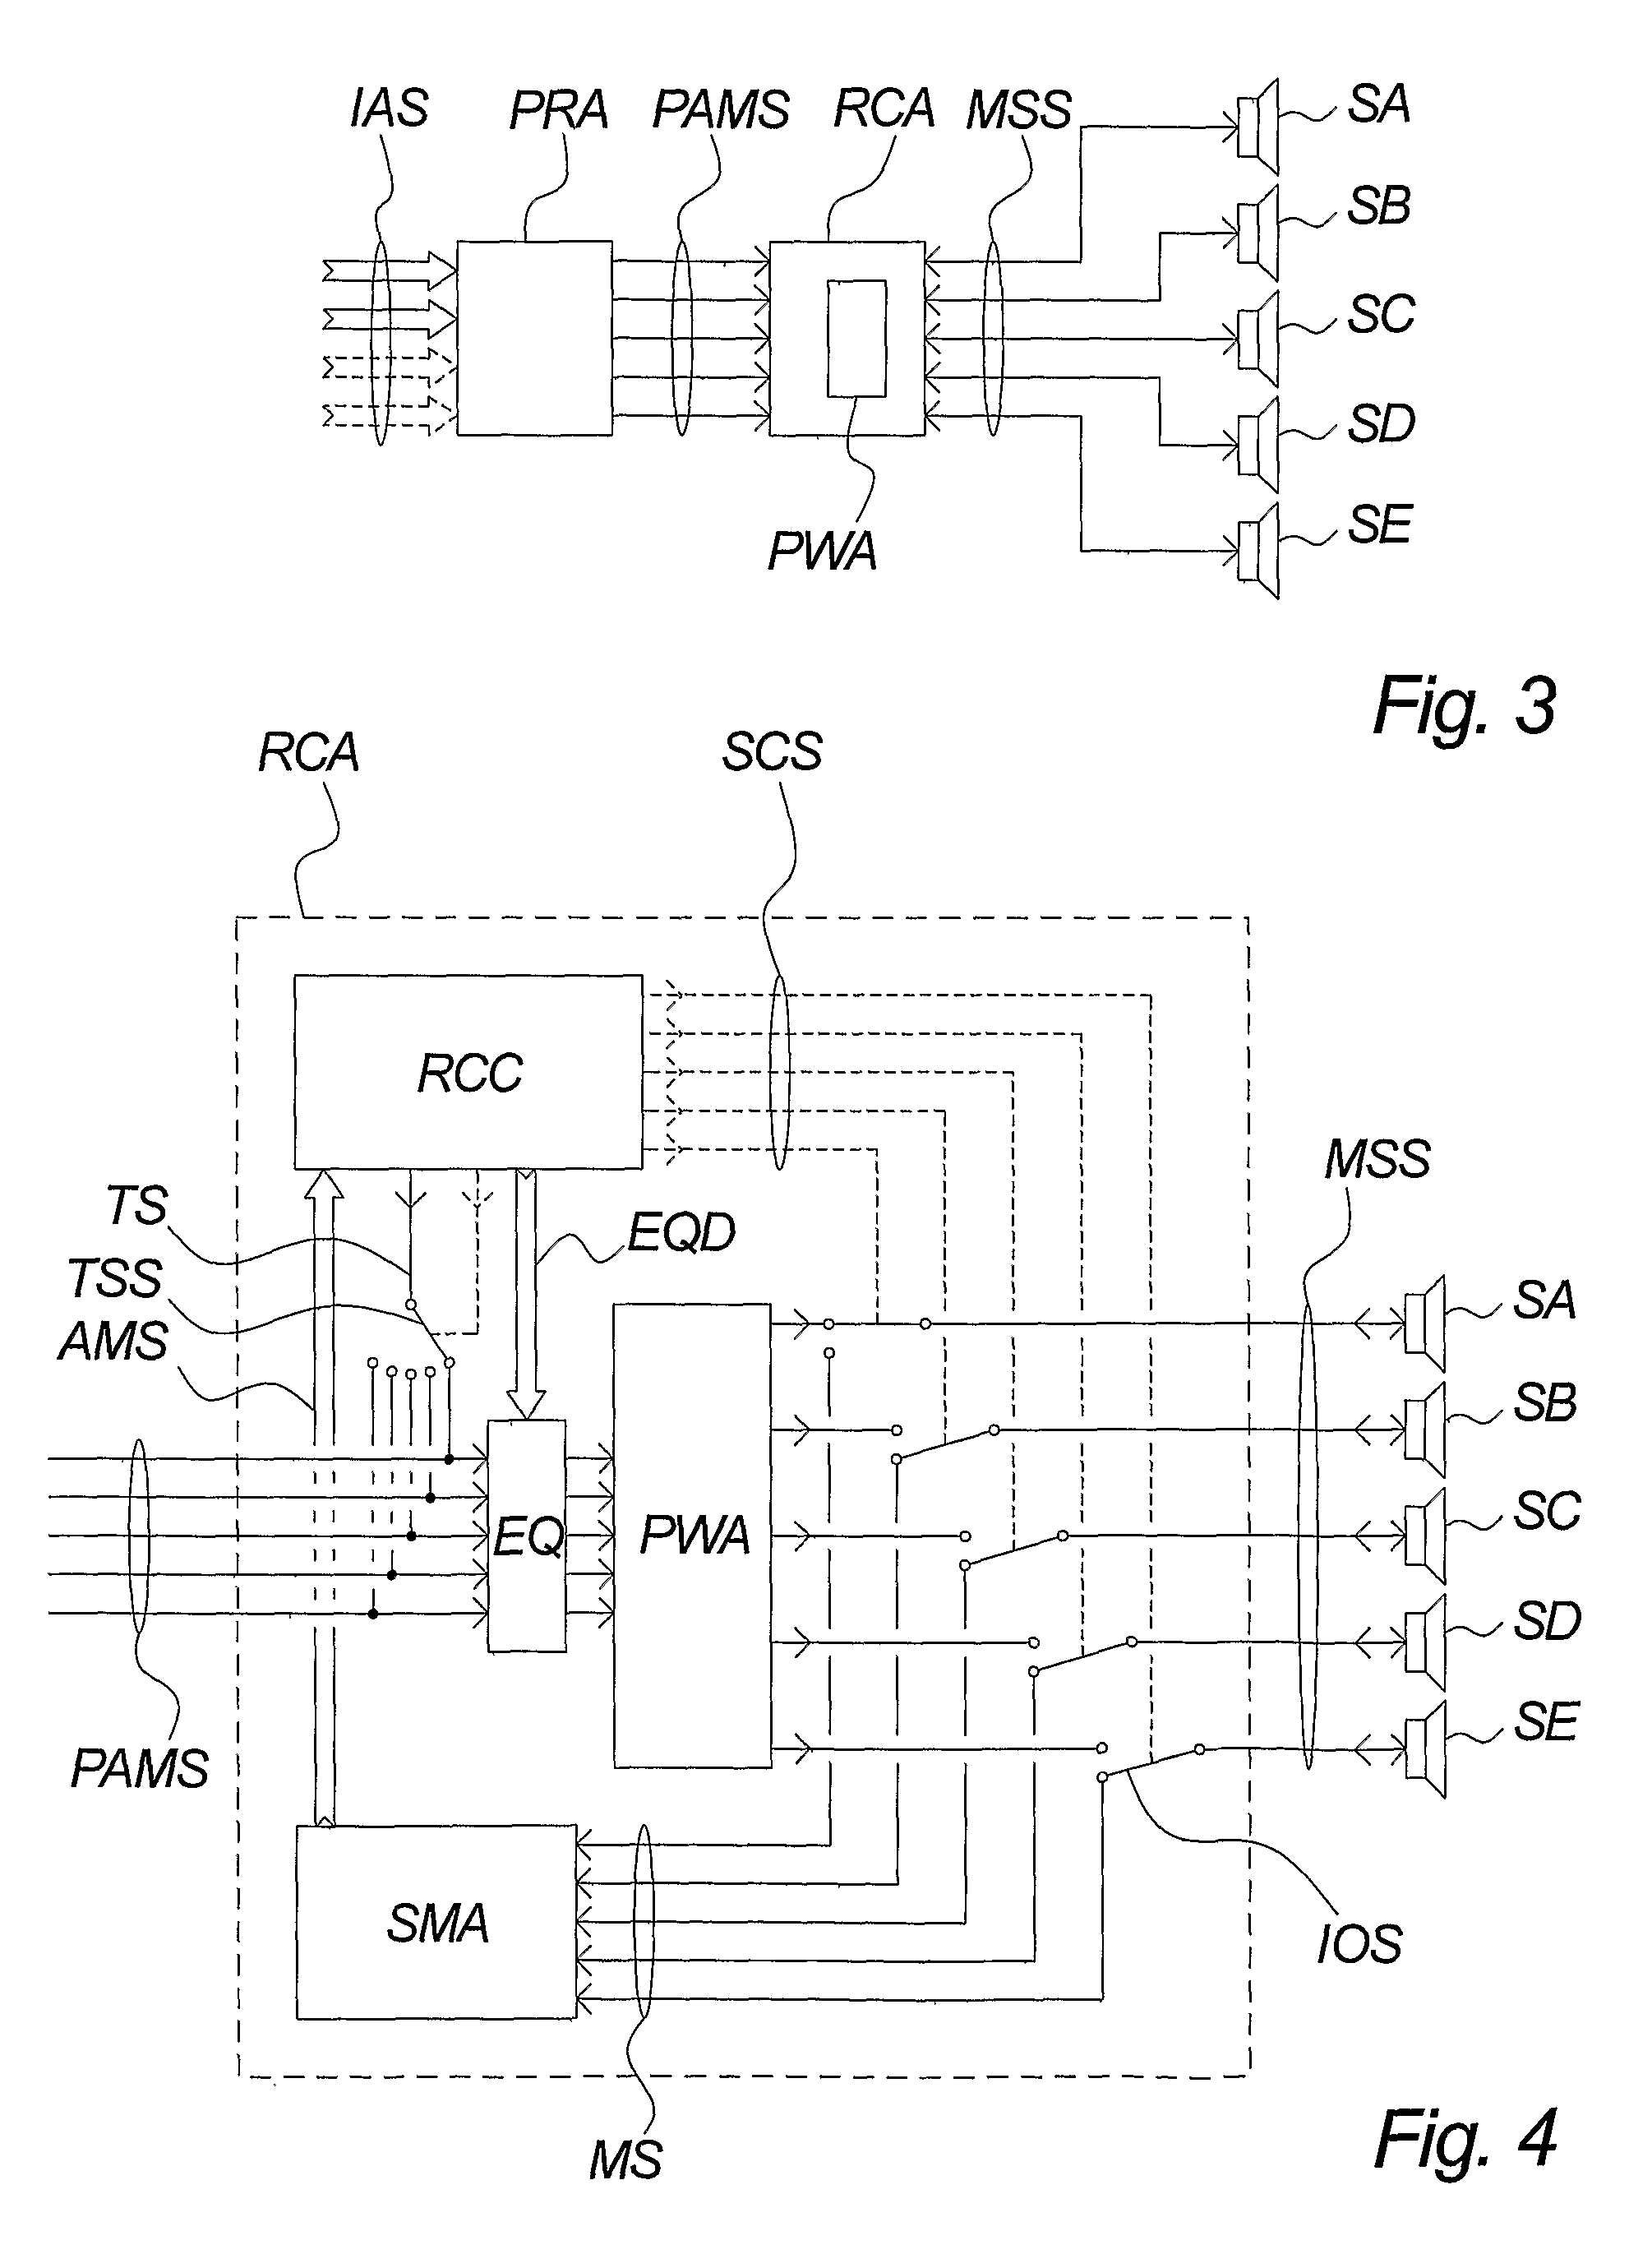 Method of performing measurements by means of an audio system comprising passive loudspeakers